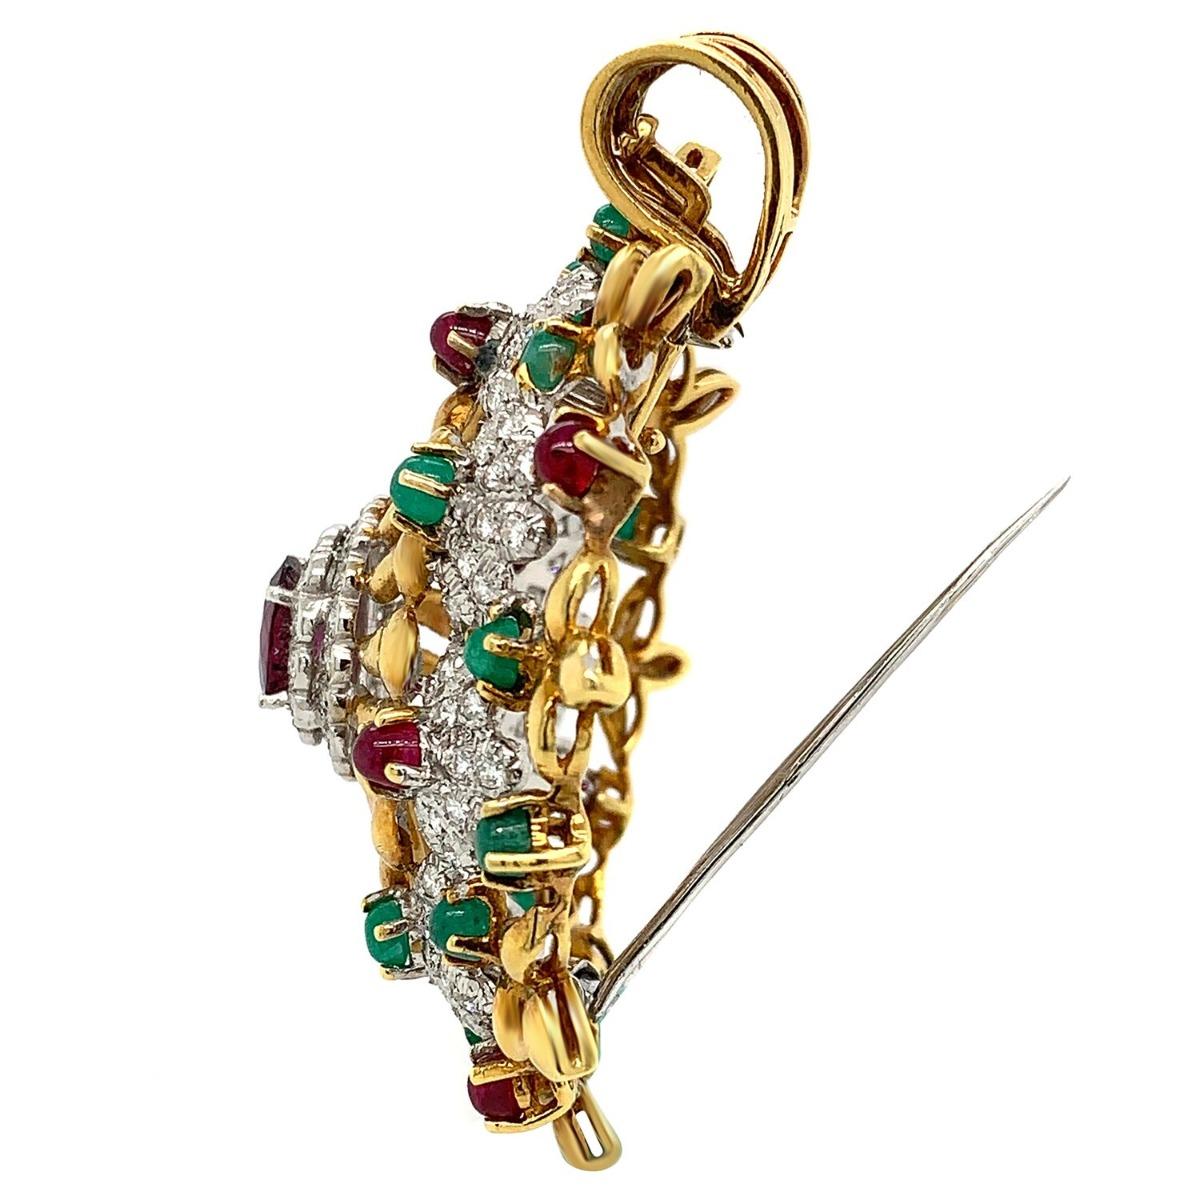 Yellow Gold Ruby Emerald Pendant Brooch 

Metal: Yellow Gold
Excellent Condition
Year of Manufacture: 1940s
Gemstone: Ruby & Emerald
Ruby (Center Stone) Weight: 2 CT
Item Weight: 36.3 grams
Length: 2.3 inch
Width: 1.9 inch